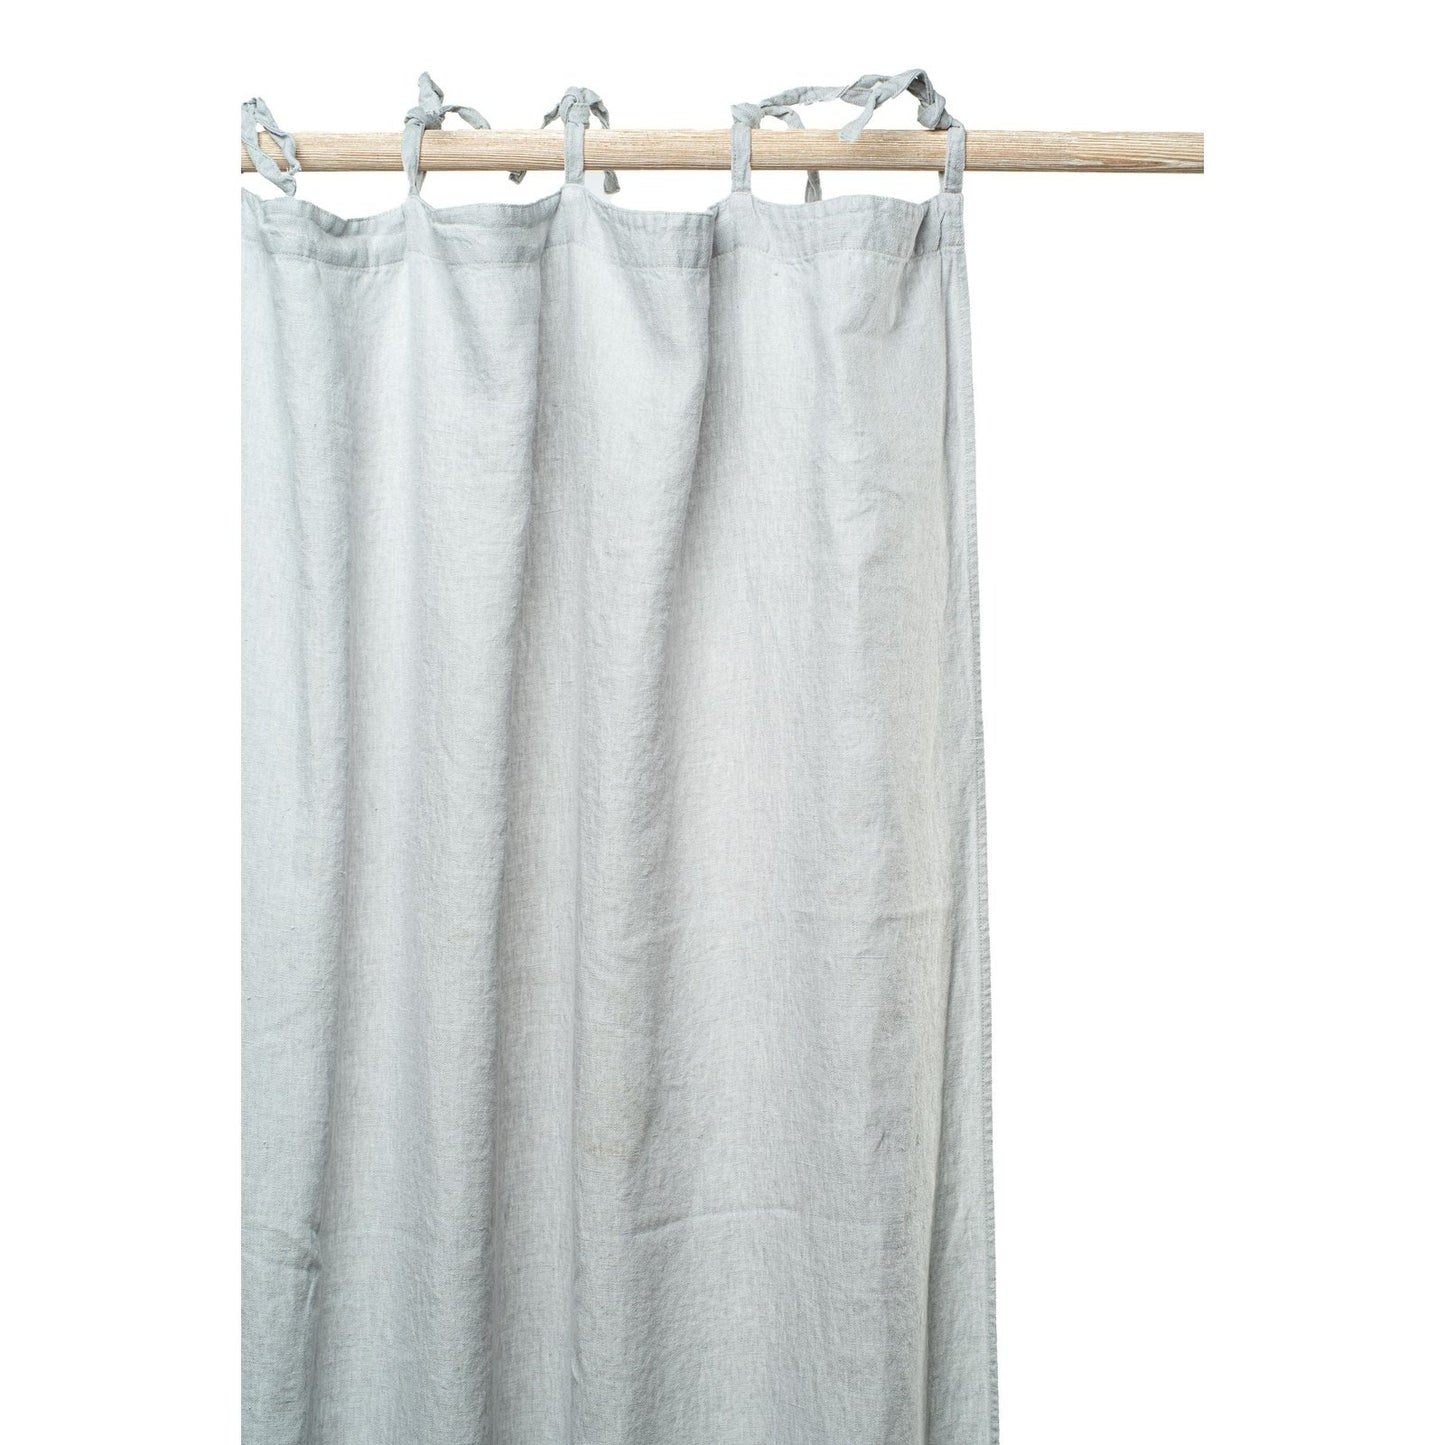 Machine-washable & wrinkle-free: Emma Hampton Blue  Linen Curtain is made for modern living